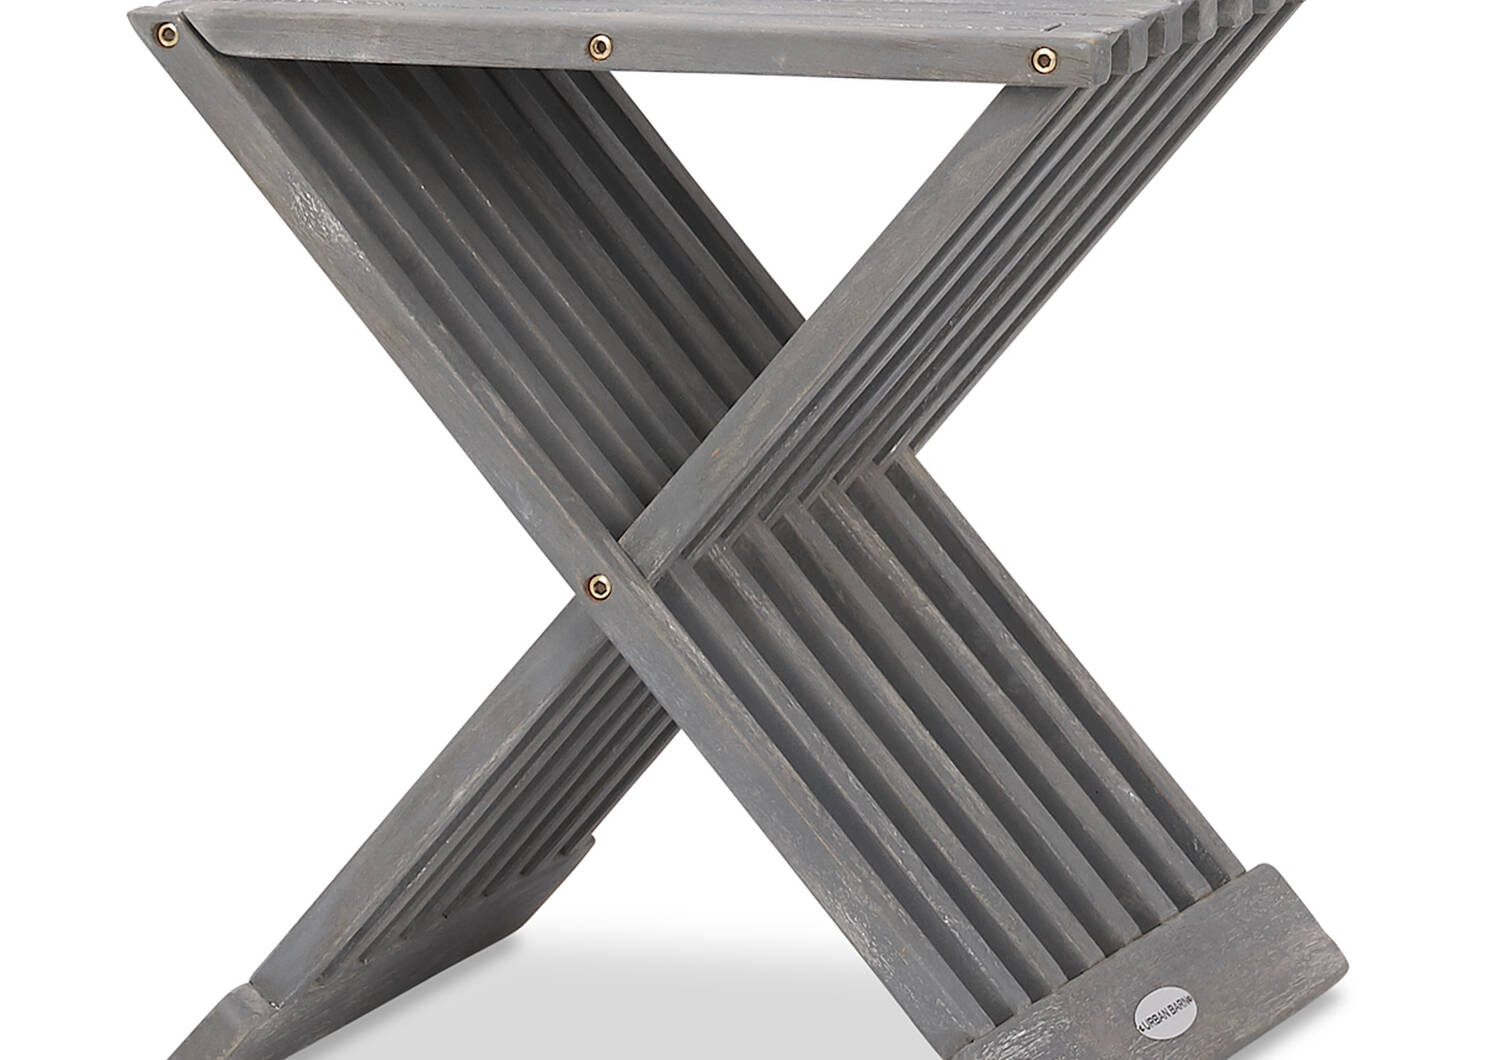 Table d'appoint Galiano -teck gris